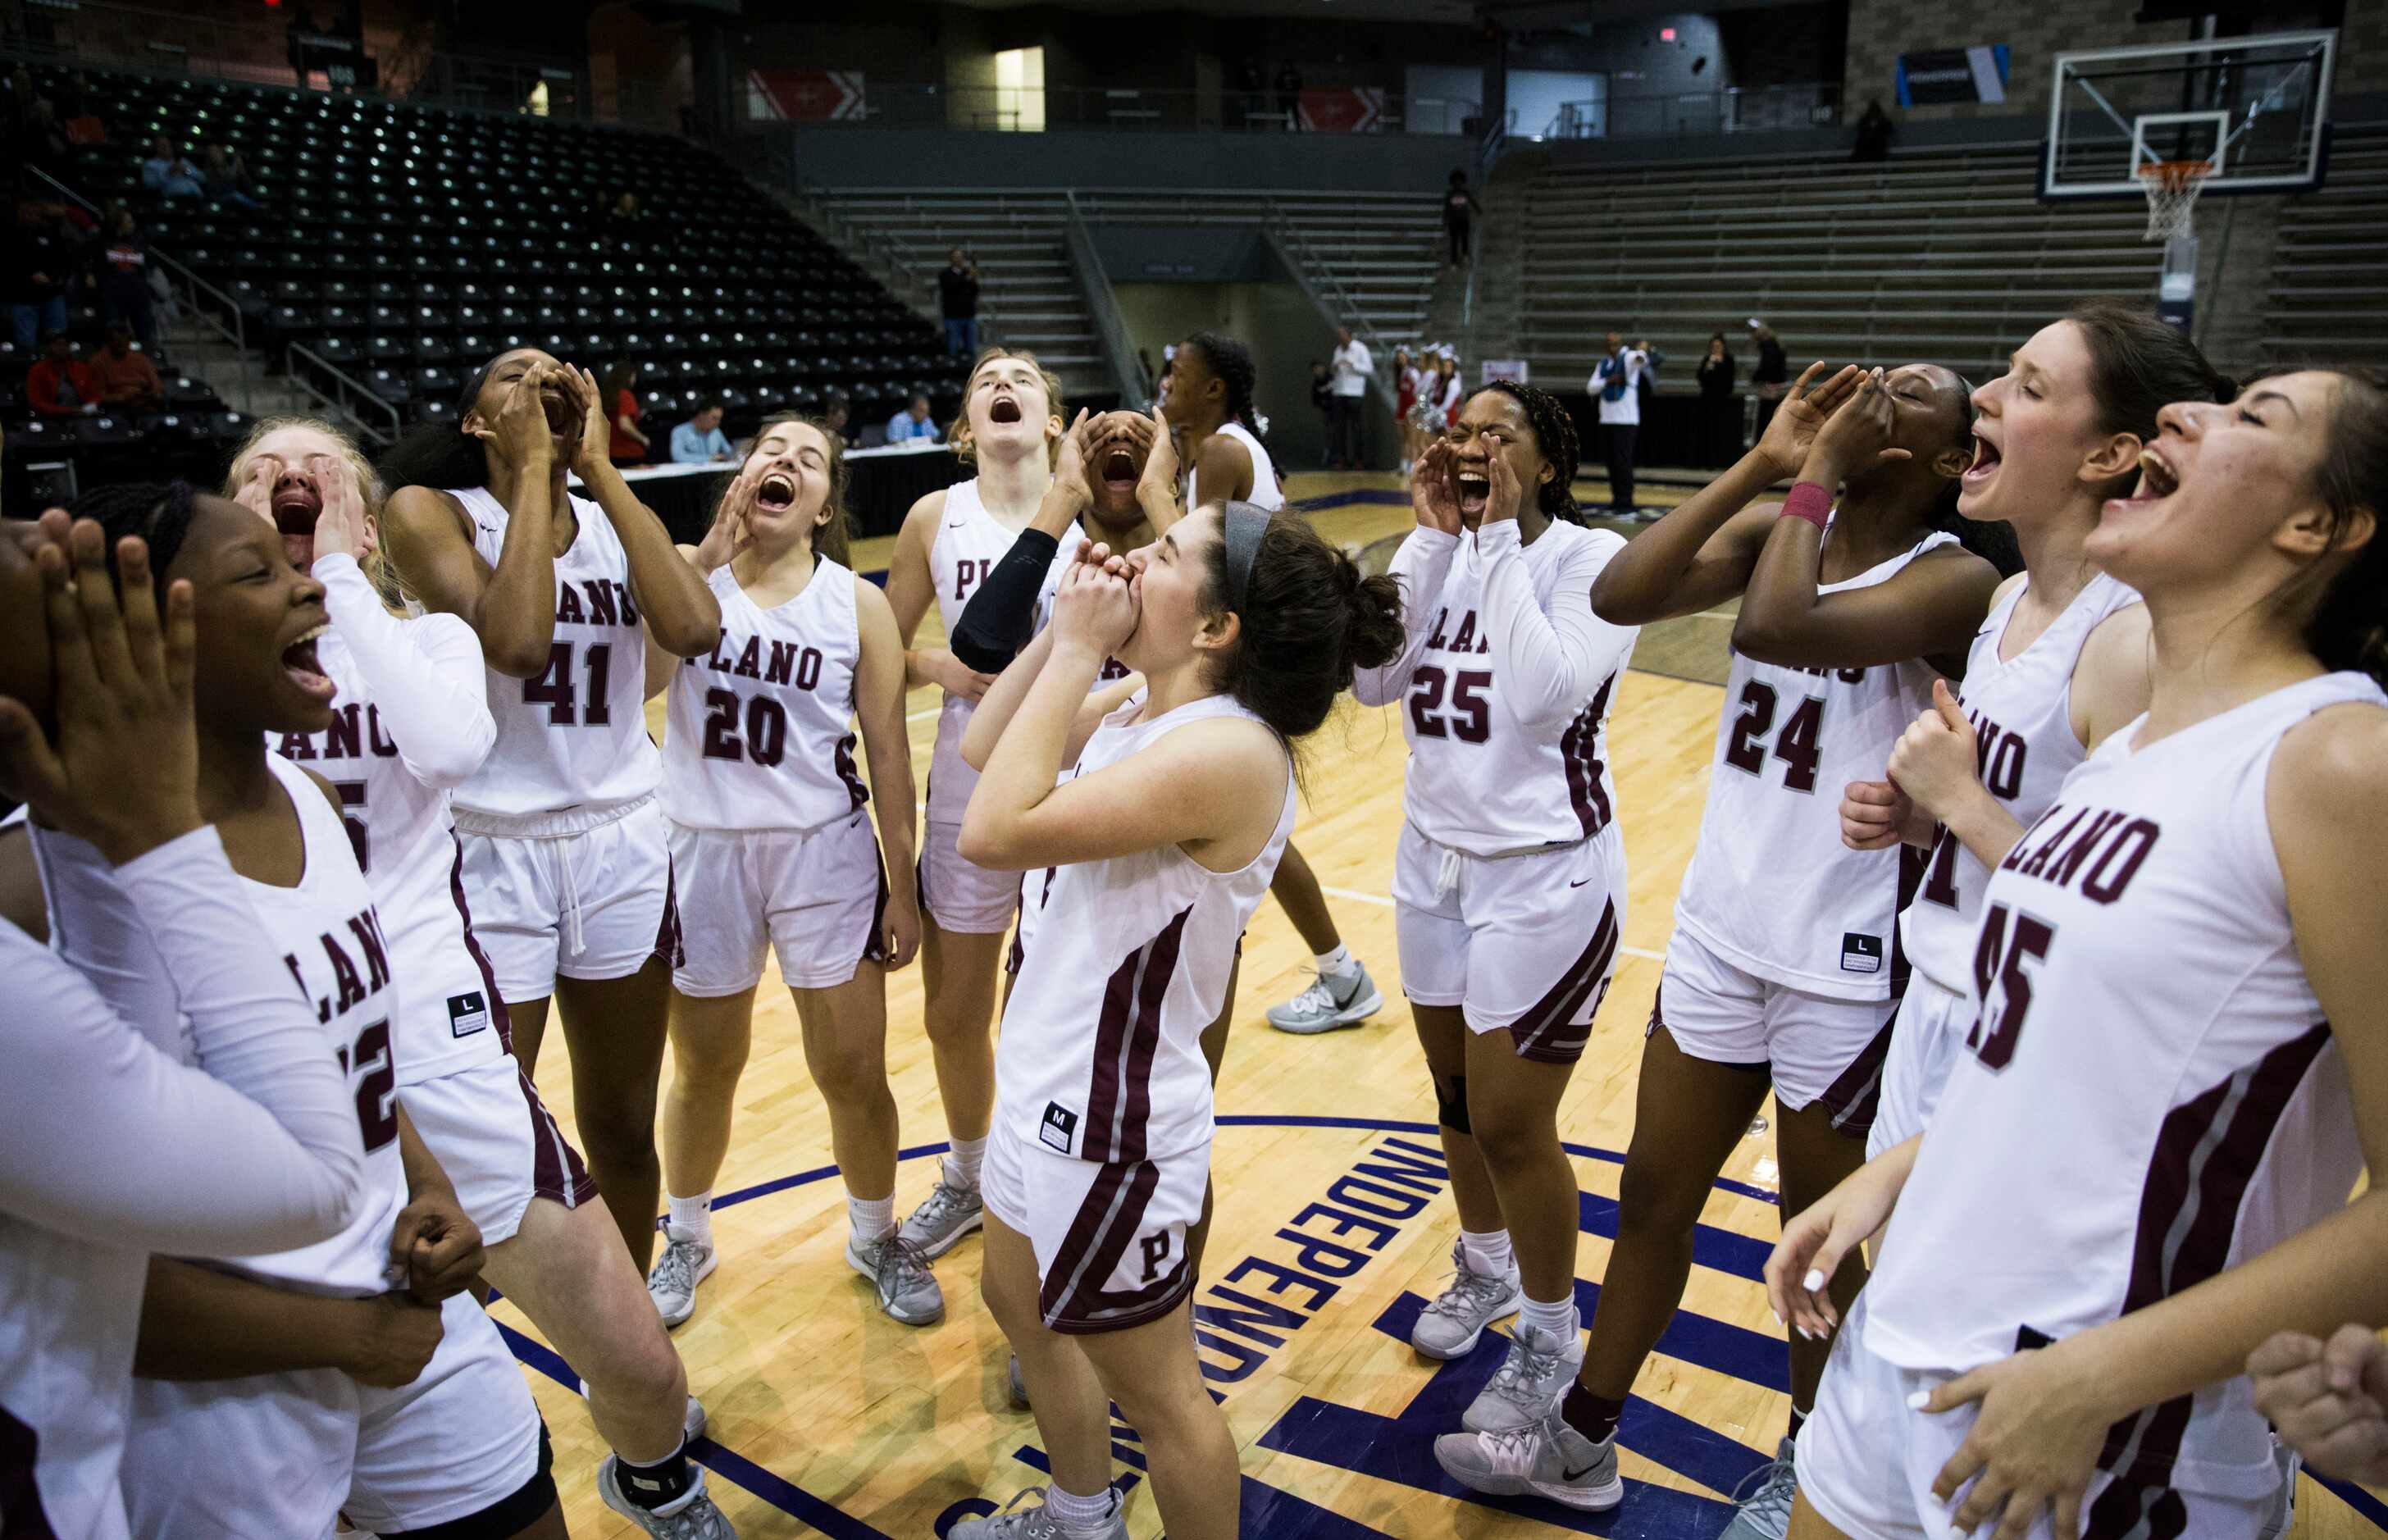 Plano celebrates a 60-46 win after a UIL 6A Region II semifinal girls basketball game...